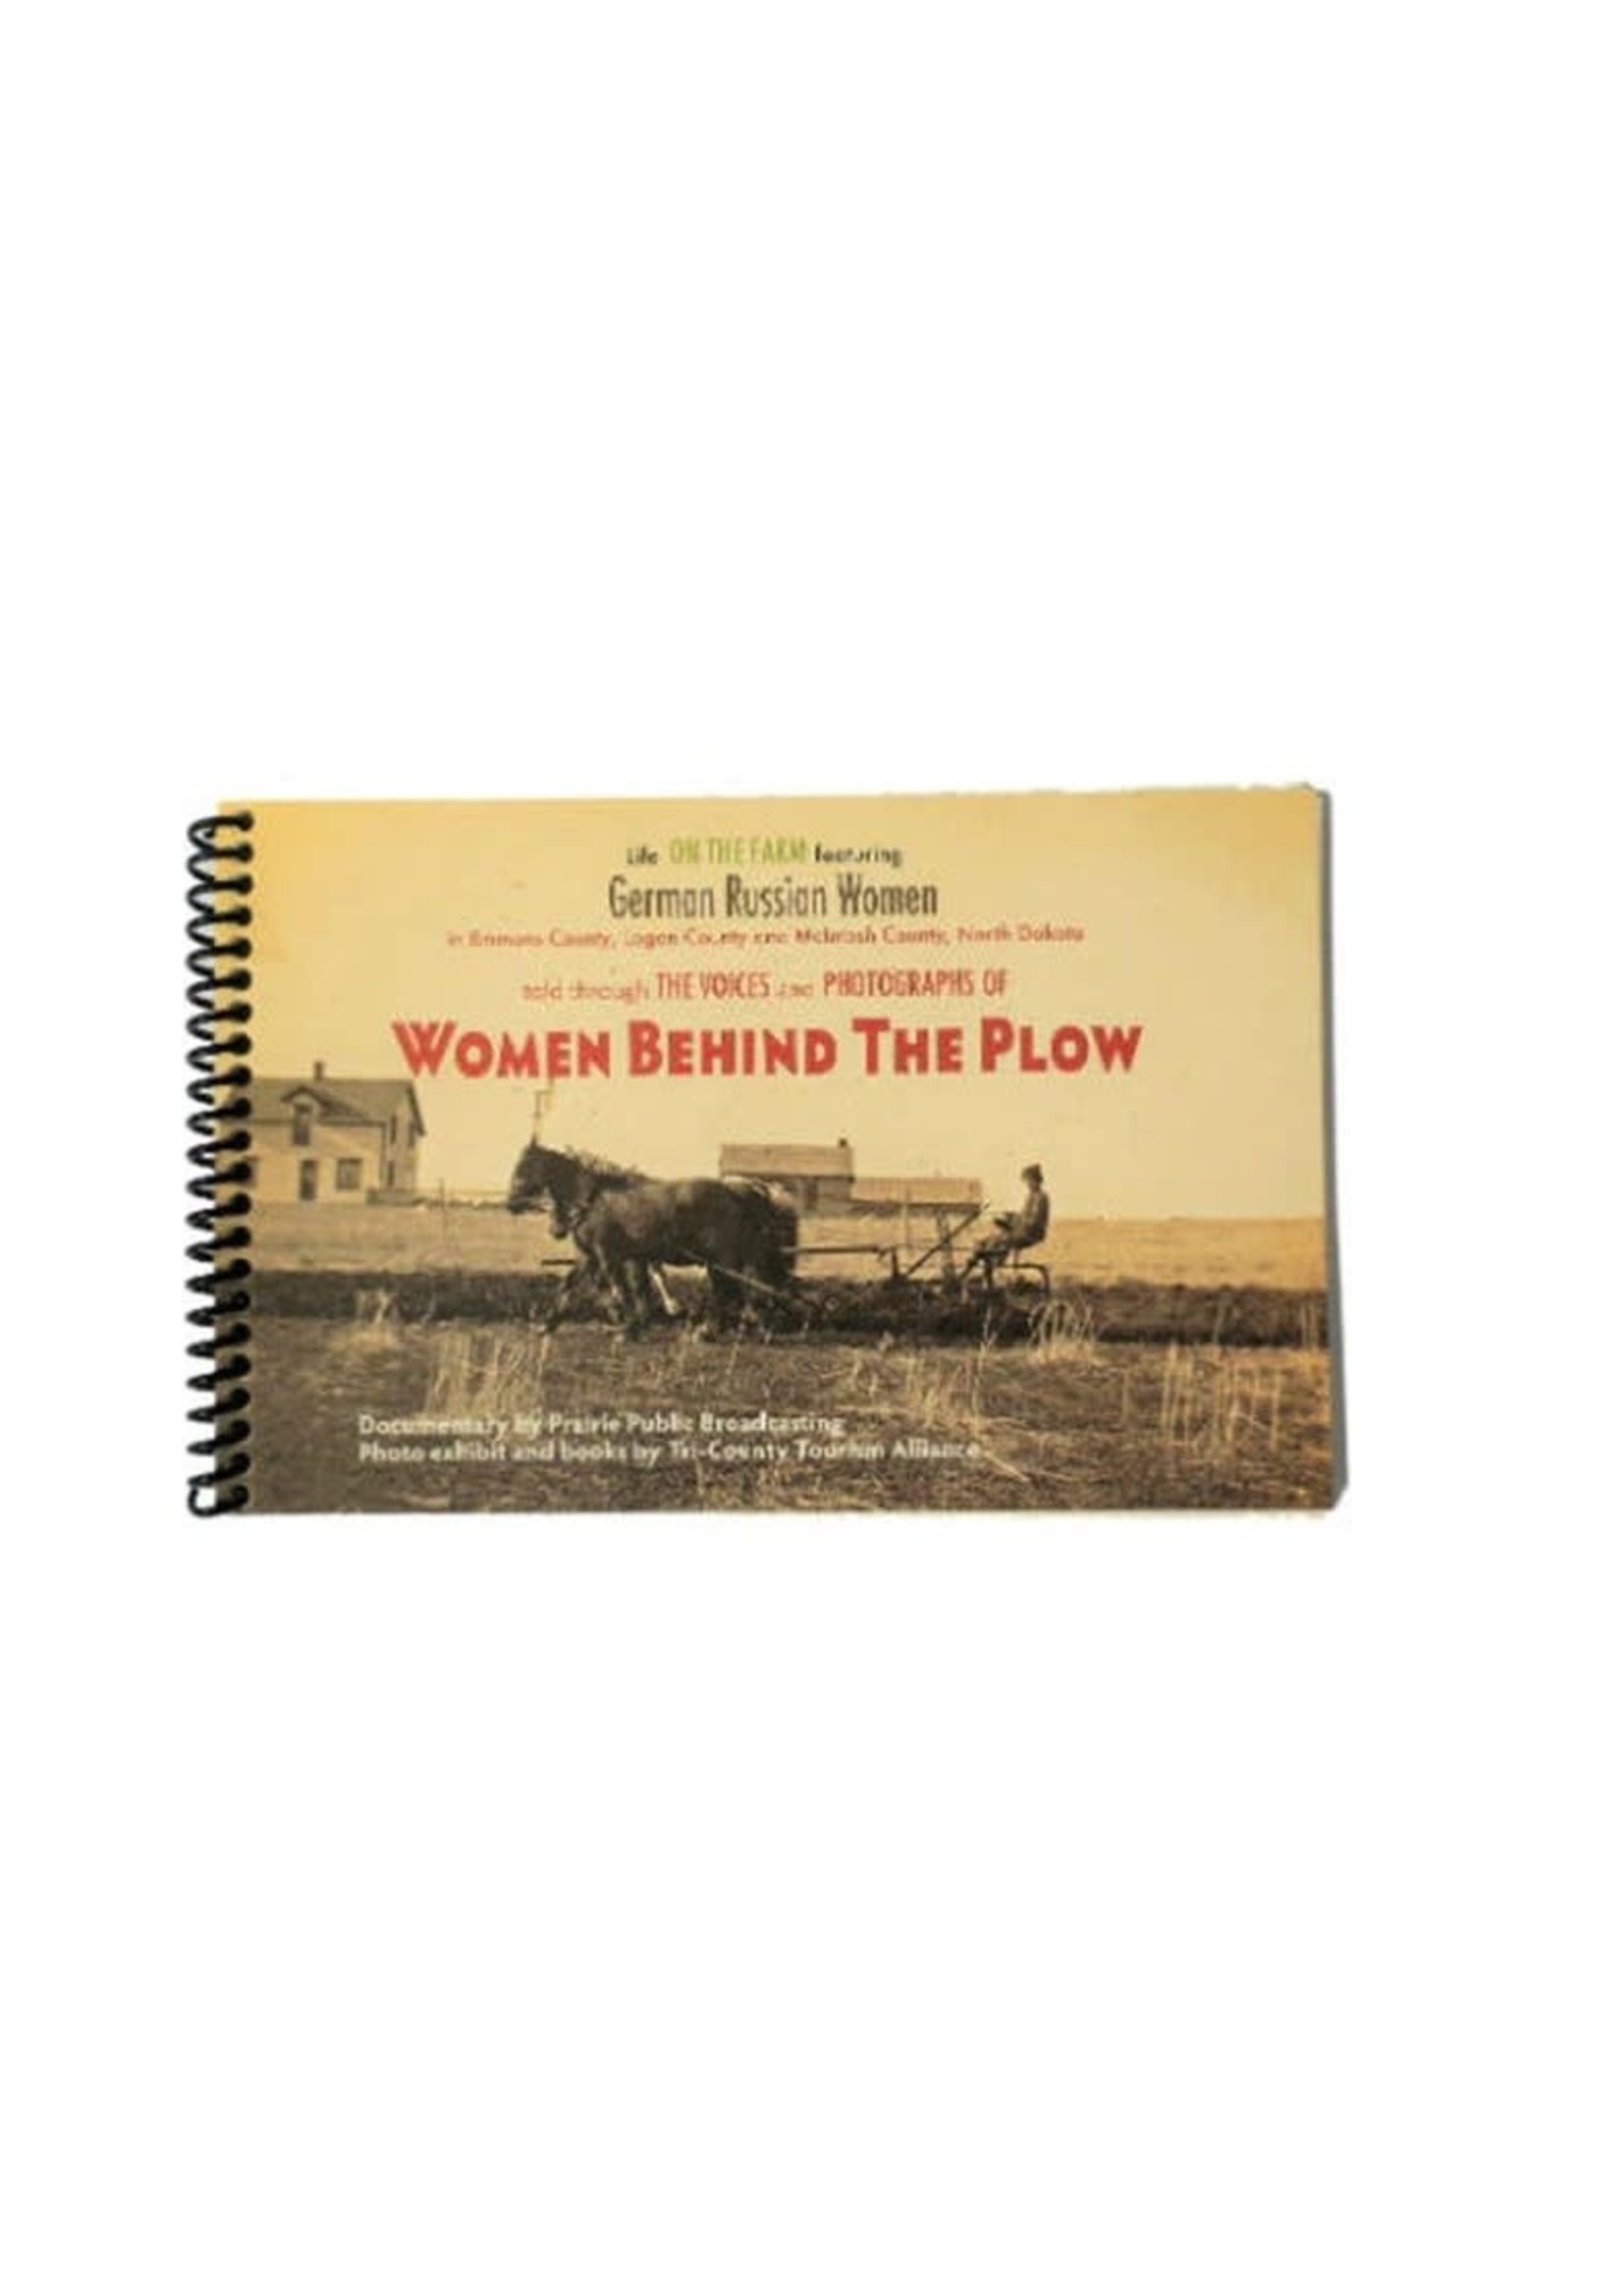 Women Behind the Plow Booklet